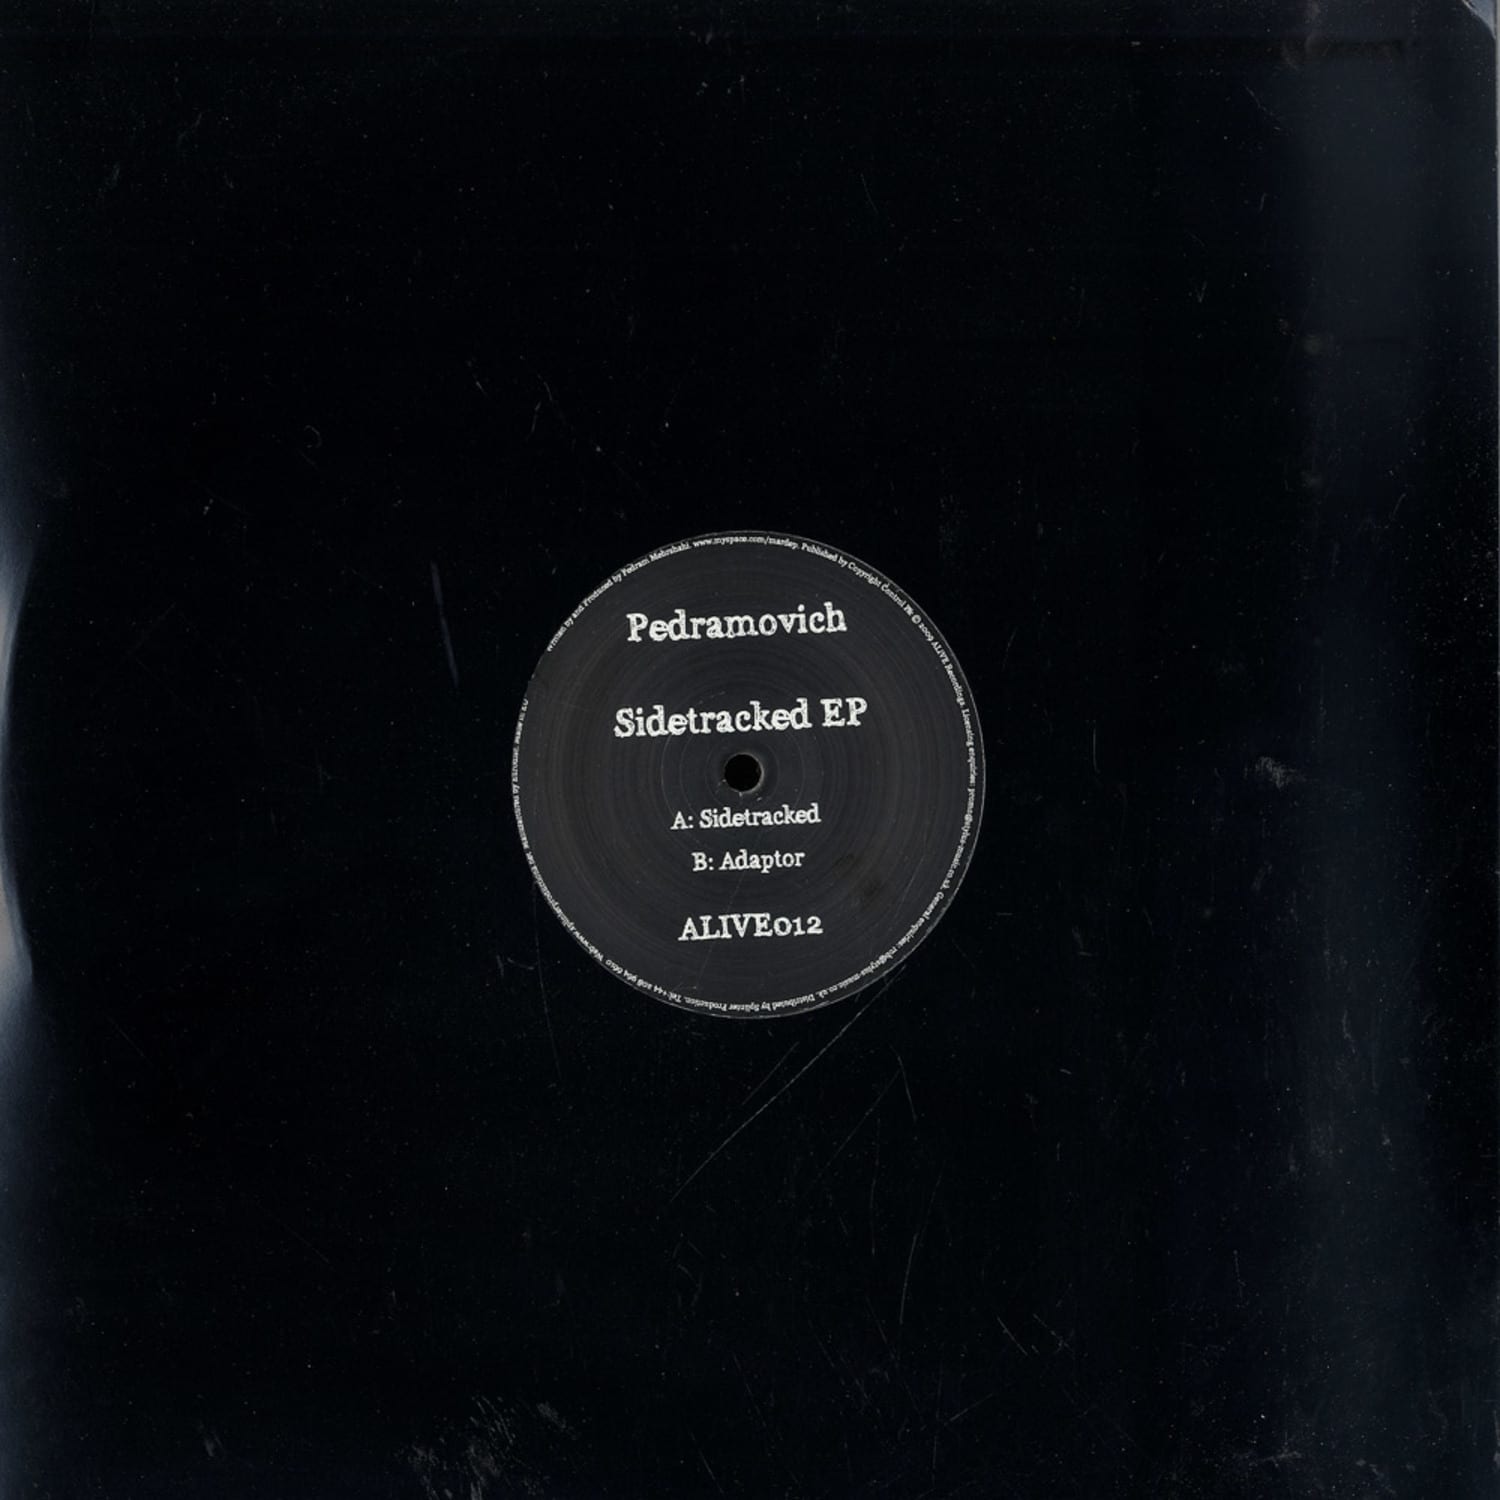 Pedramovich - SIDETRACKED EP